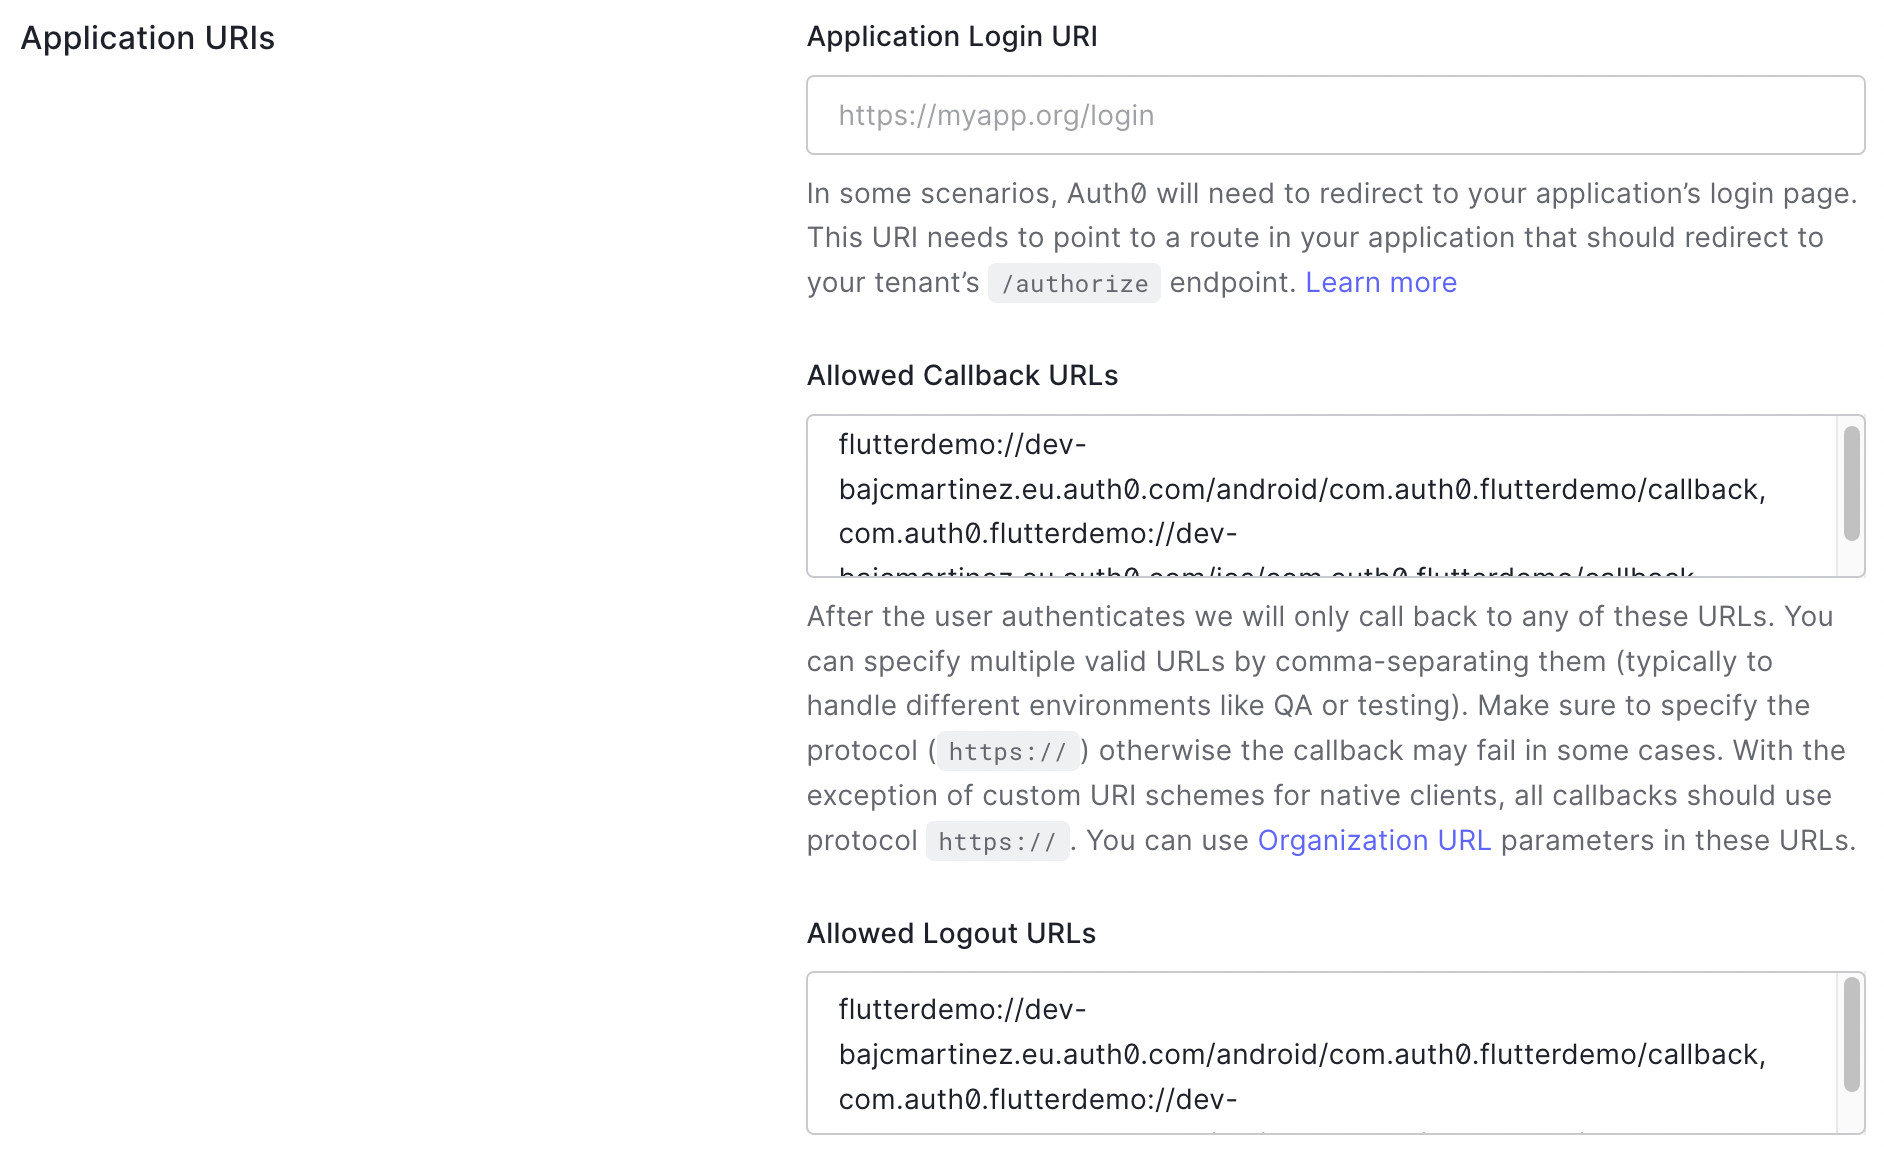 Auth0 Application URIs settings for Flutter apps